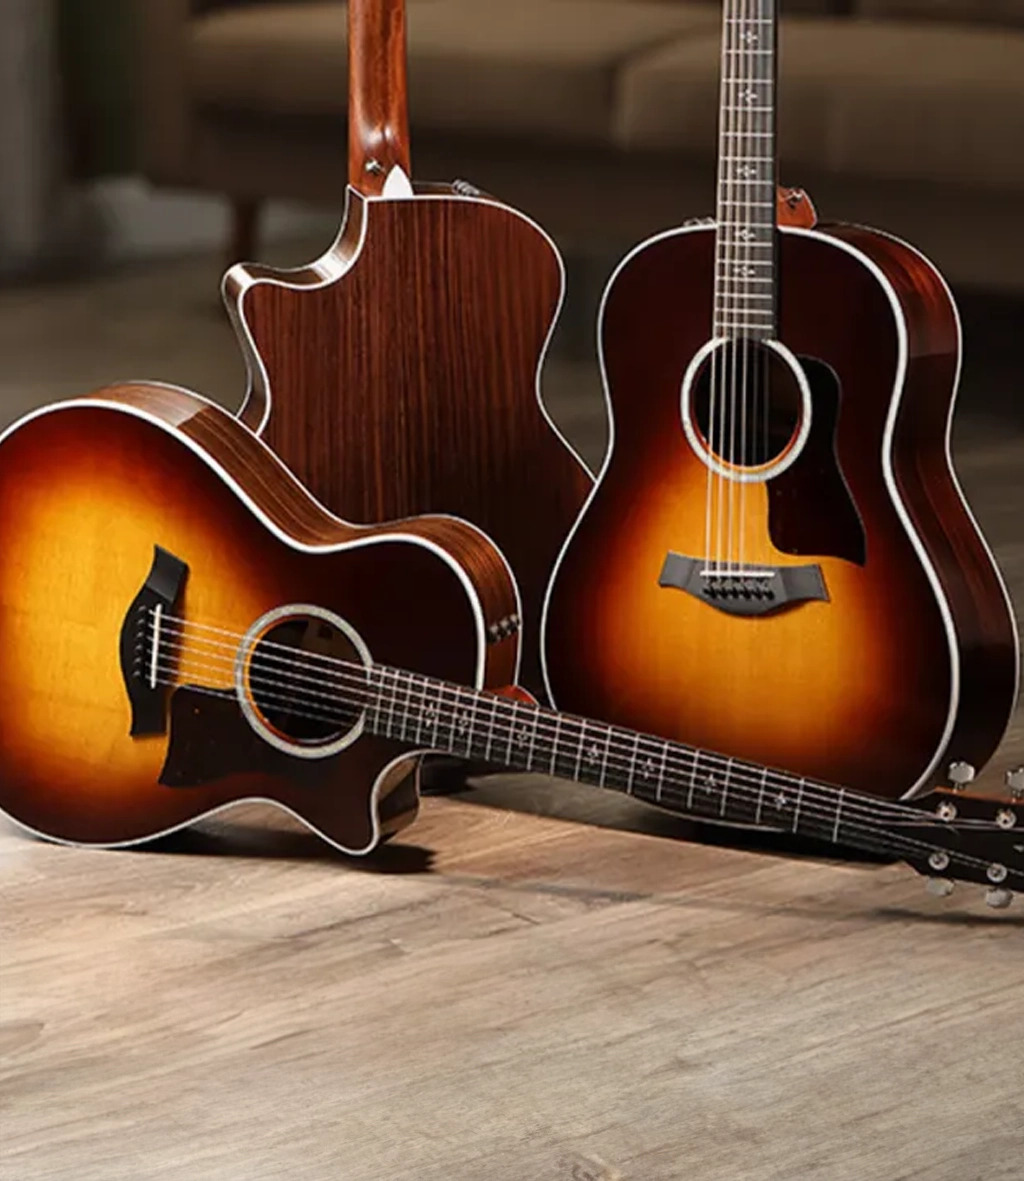 Three guitars grouped together on wooden floor